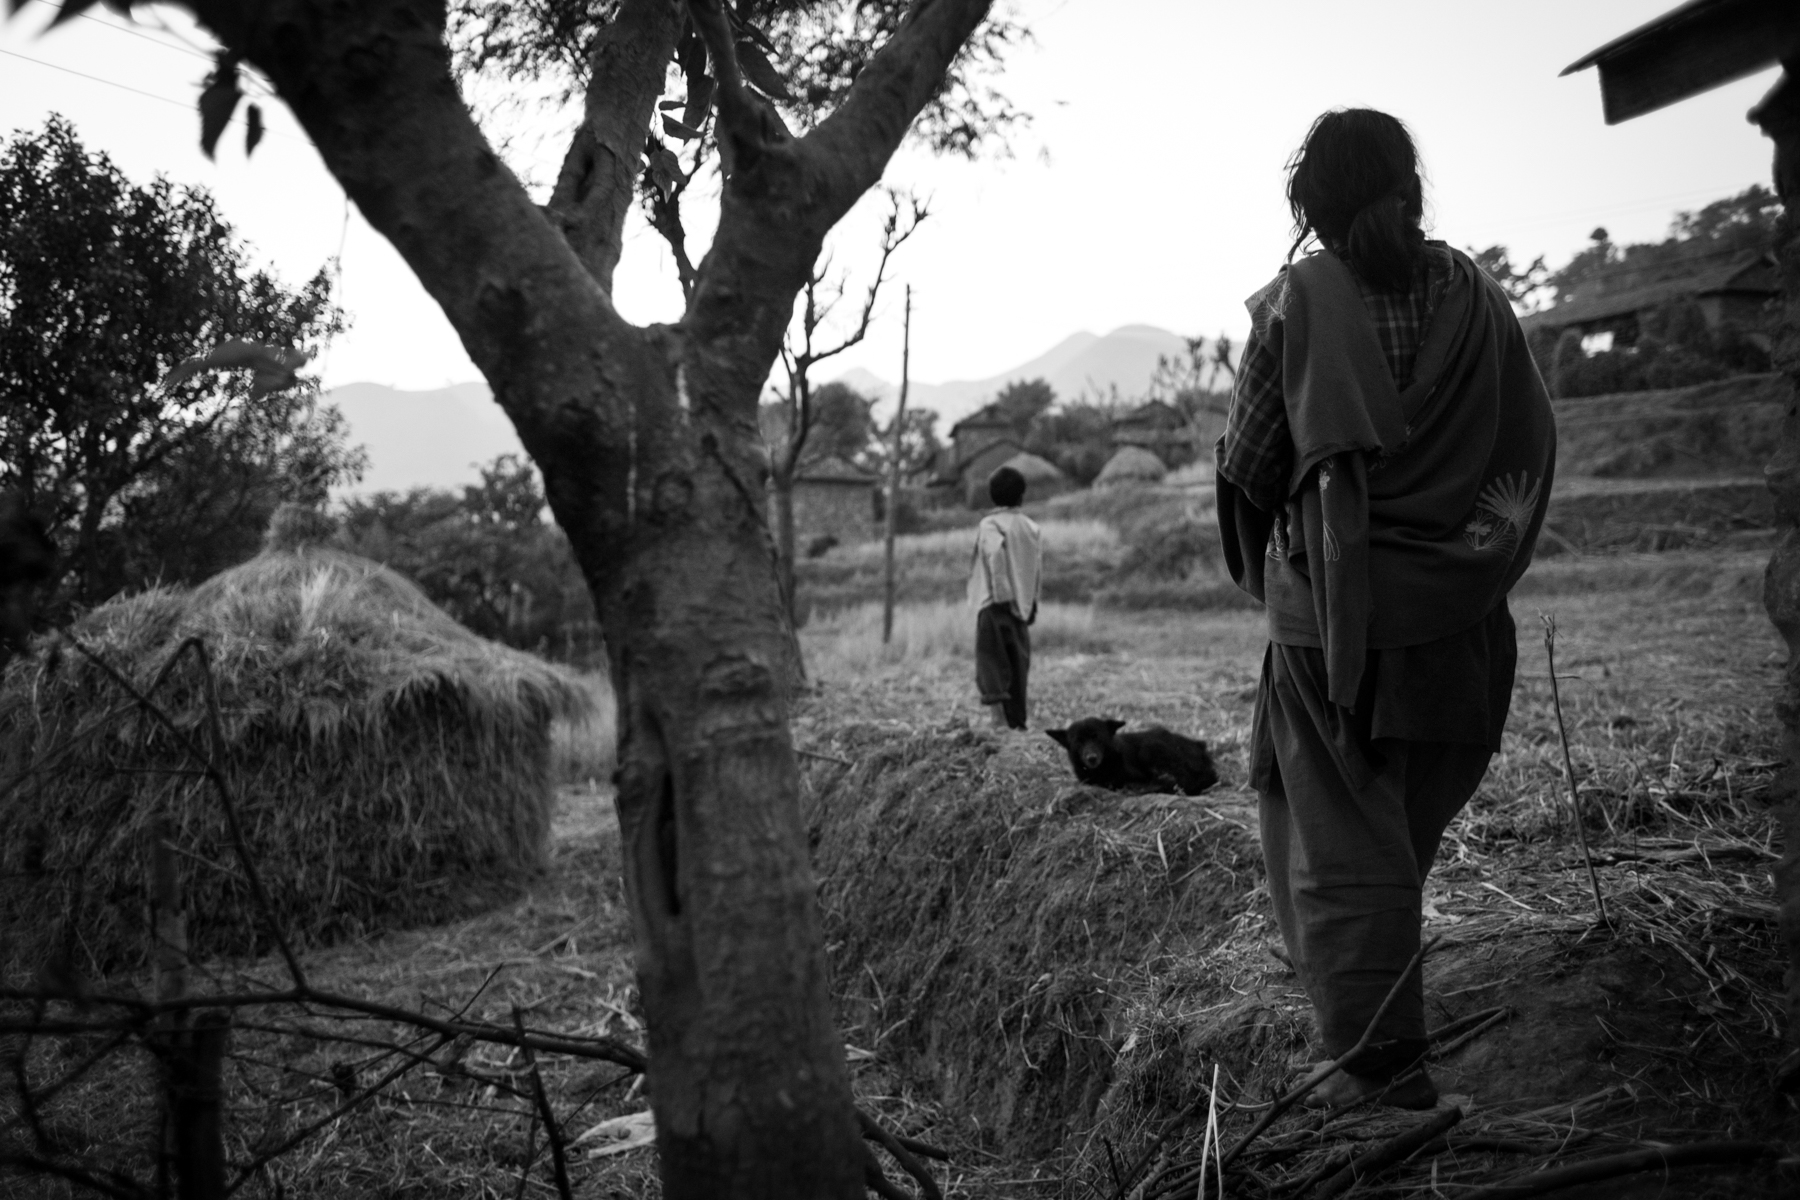 Chanamati Maggrati and her son call their pig in the evening as they are afraid to go towards the other houses in
the village. 17 December 2013, Dhading, Nepal.